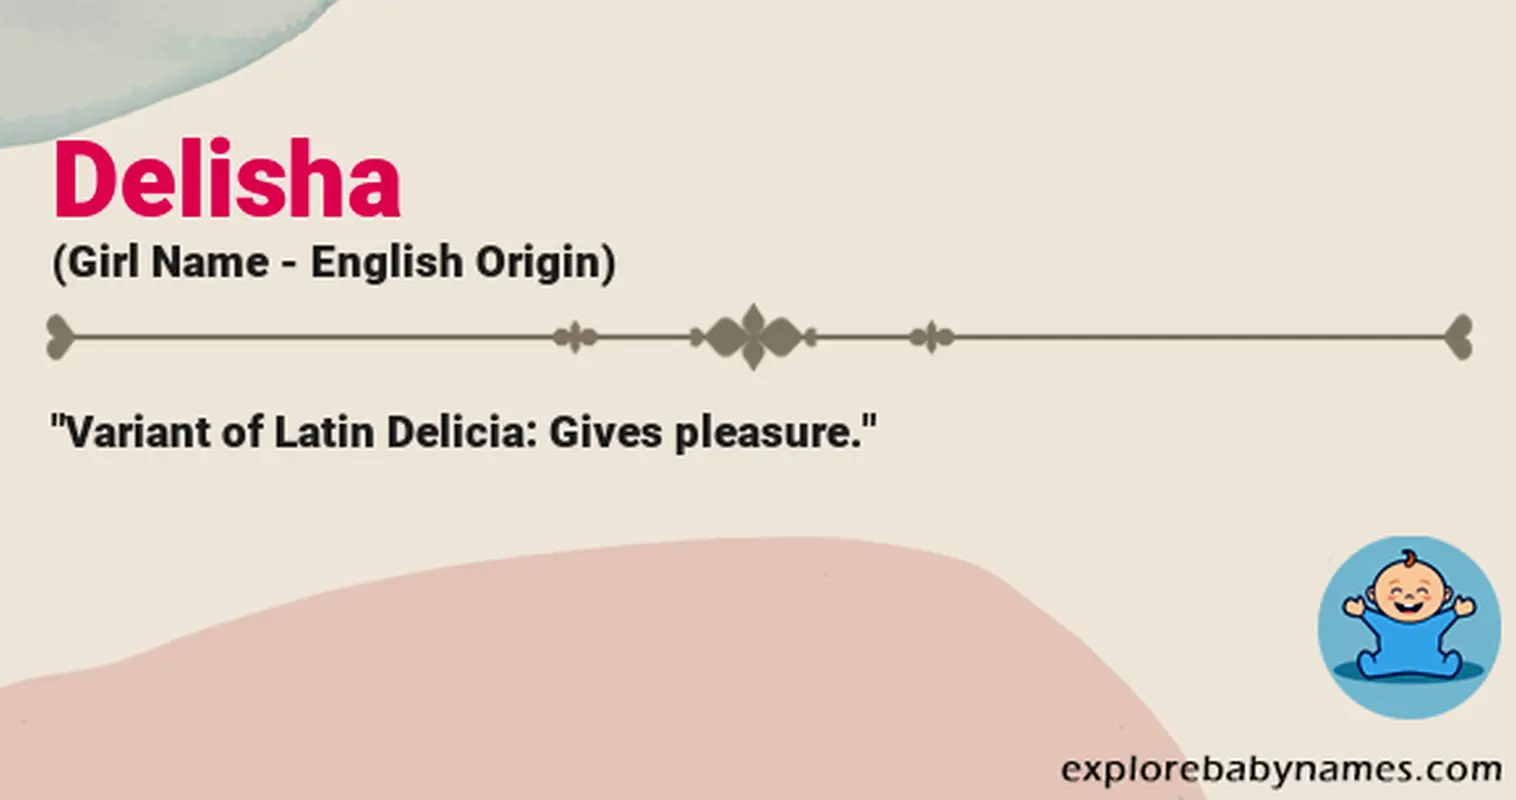 Meaning of Delisha